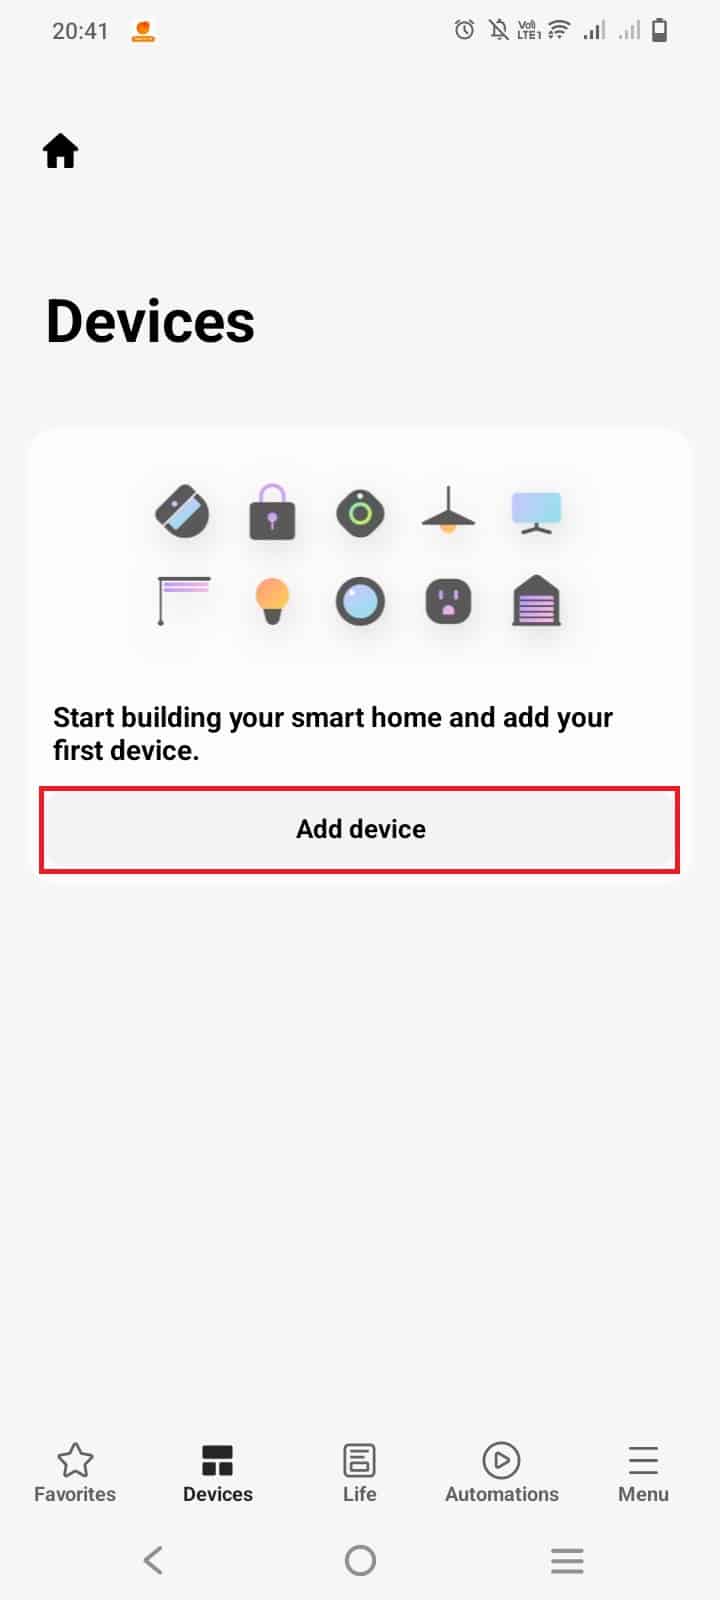 Once the Devices section opens, tap on Add device to add your device.